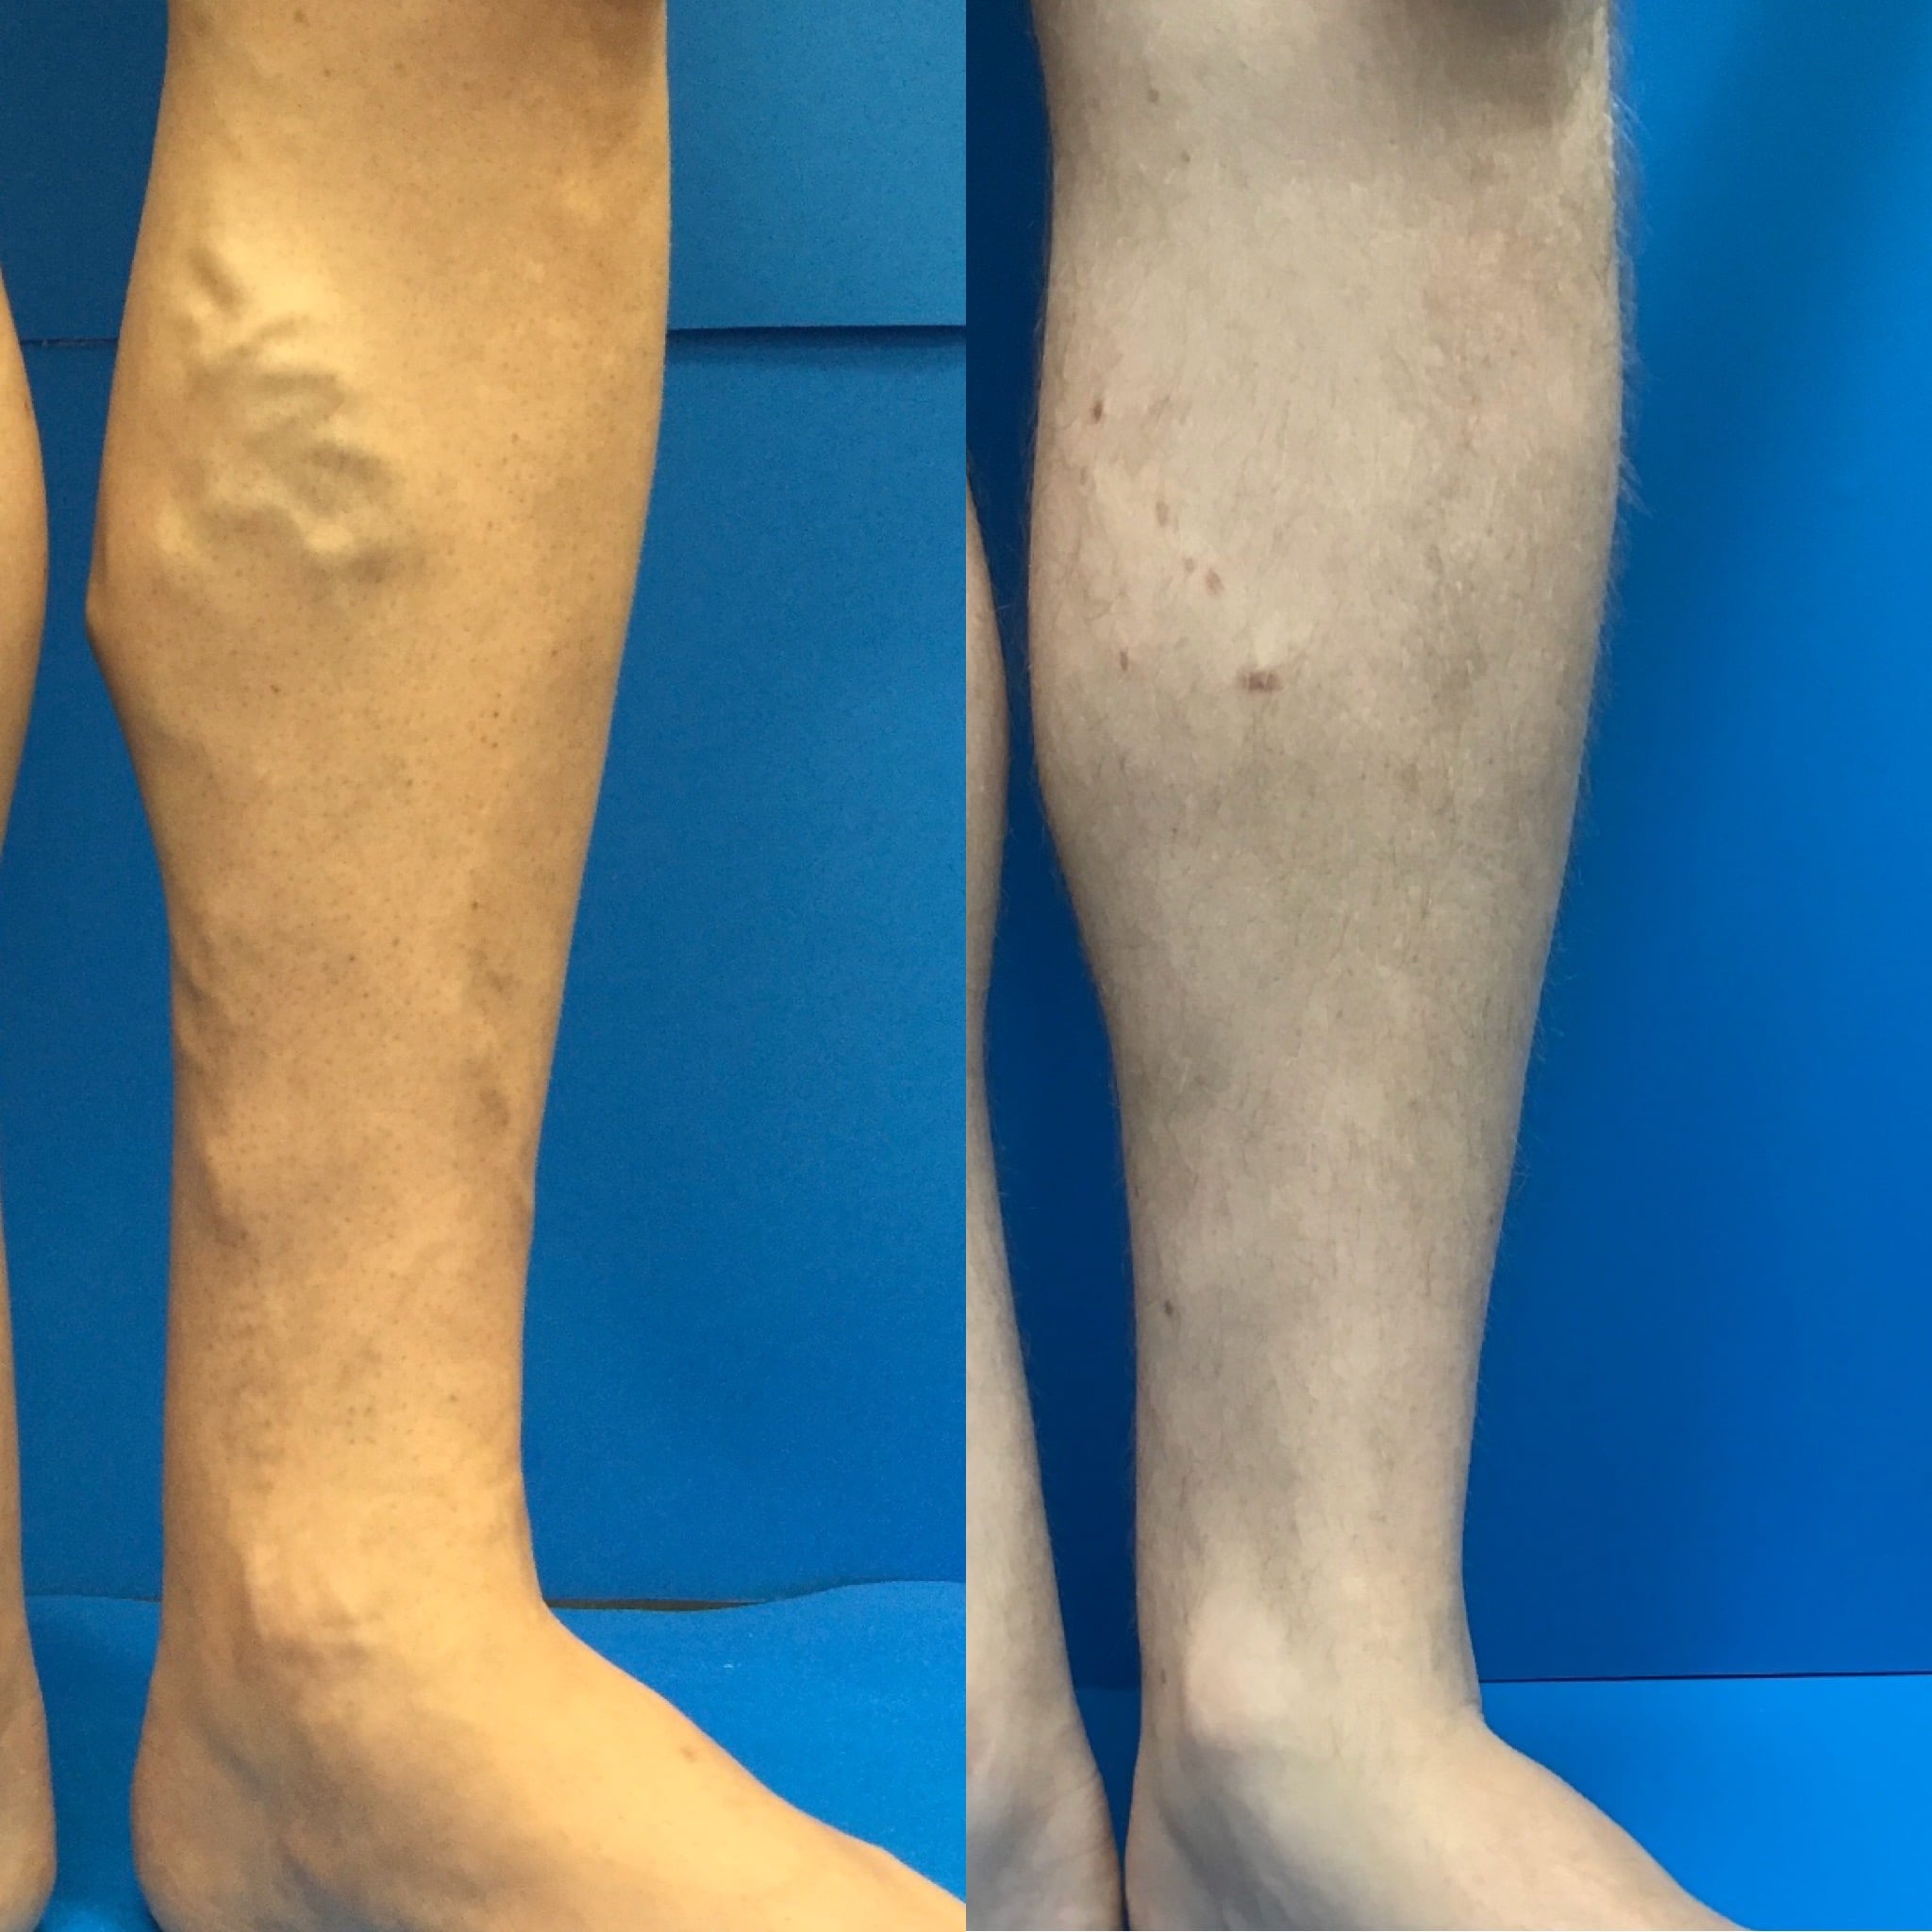 At What Age Do Varicose Veins Appear? - BHVCI - Blog